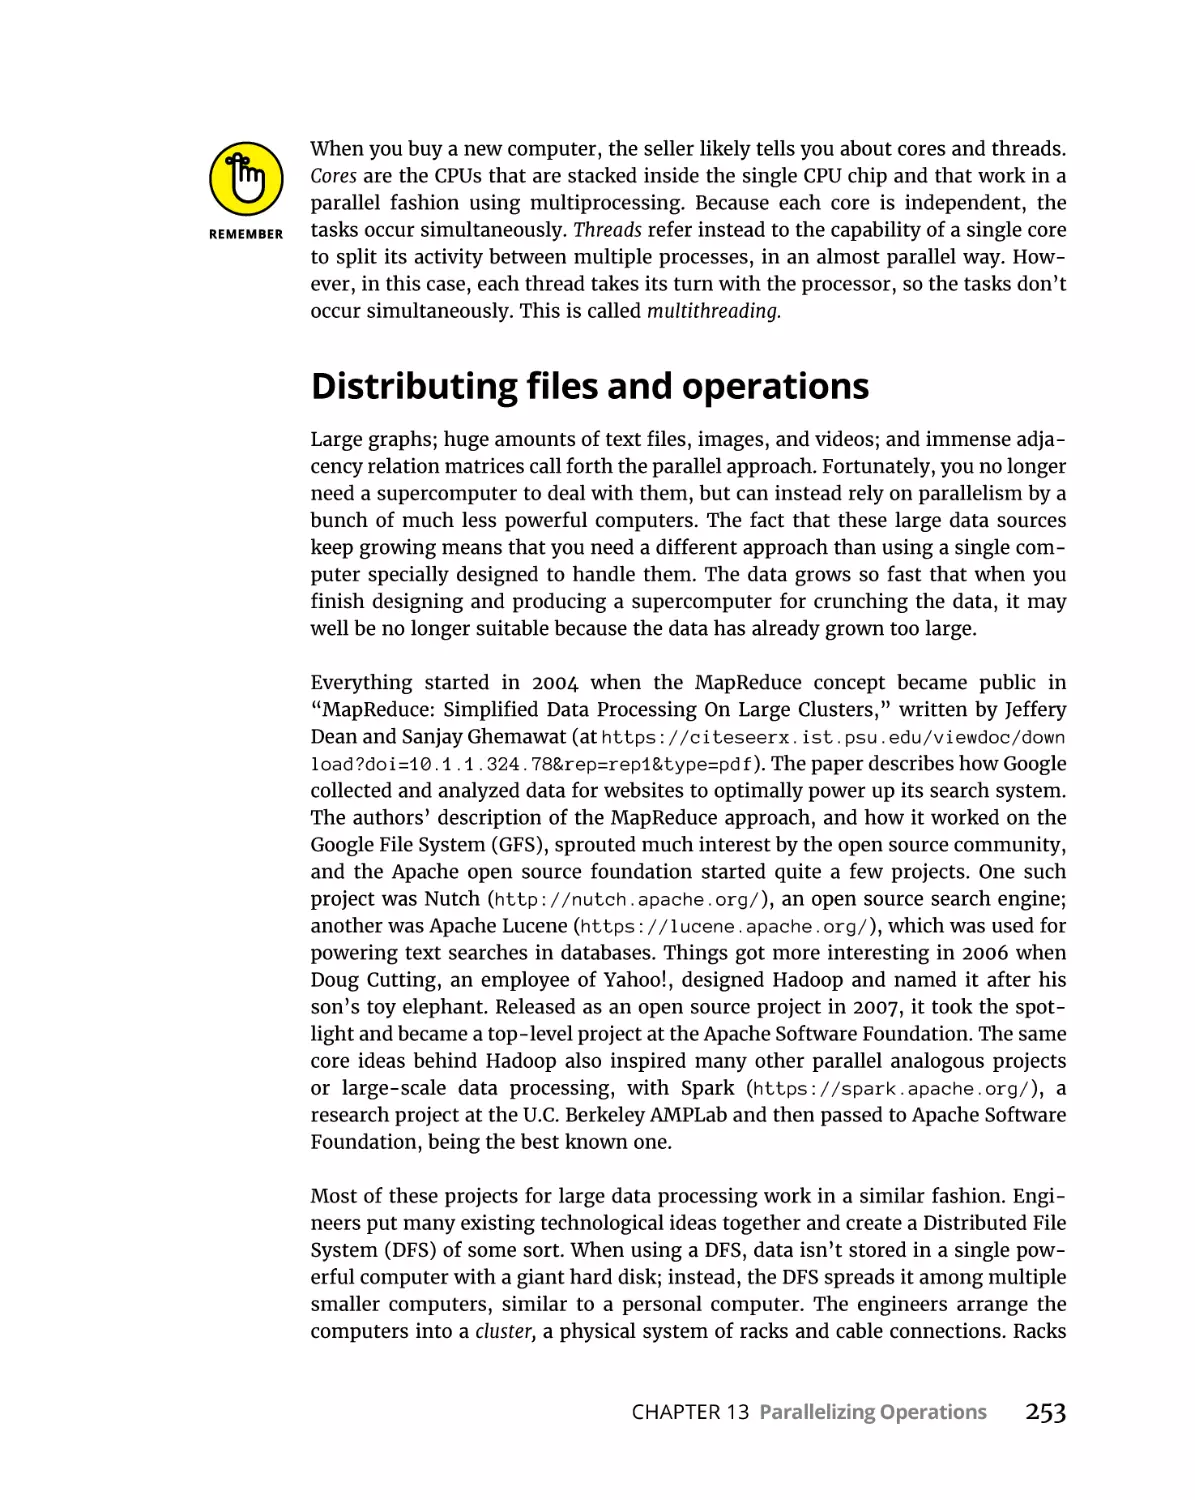 Distributing files and operations